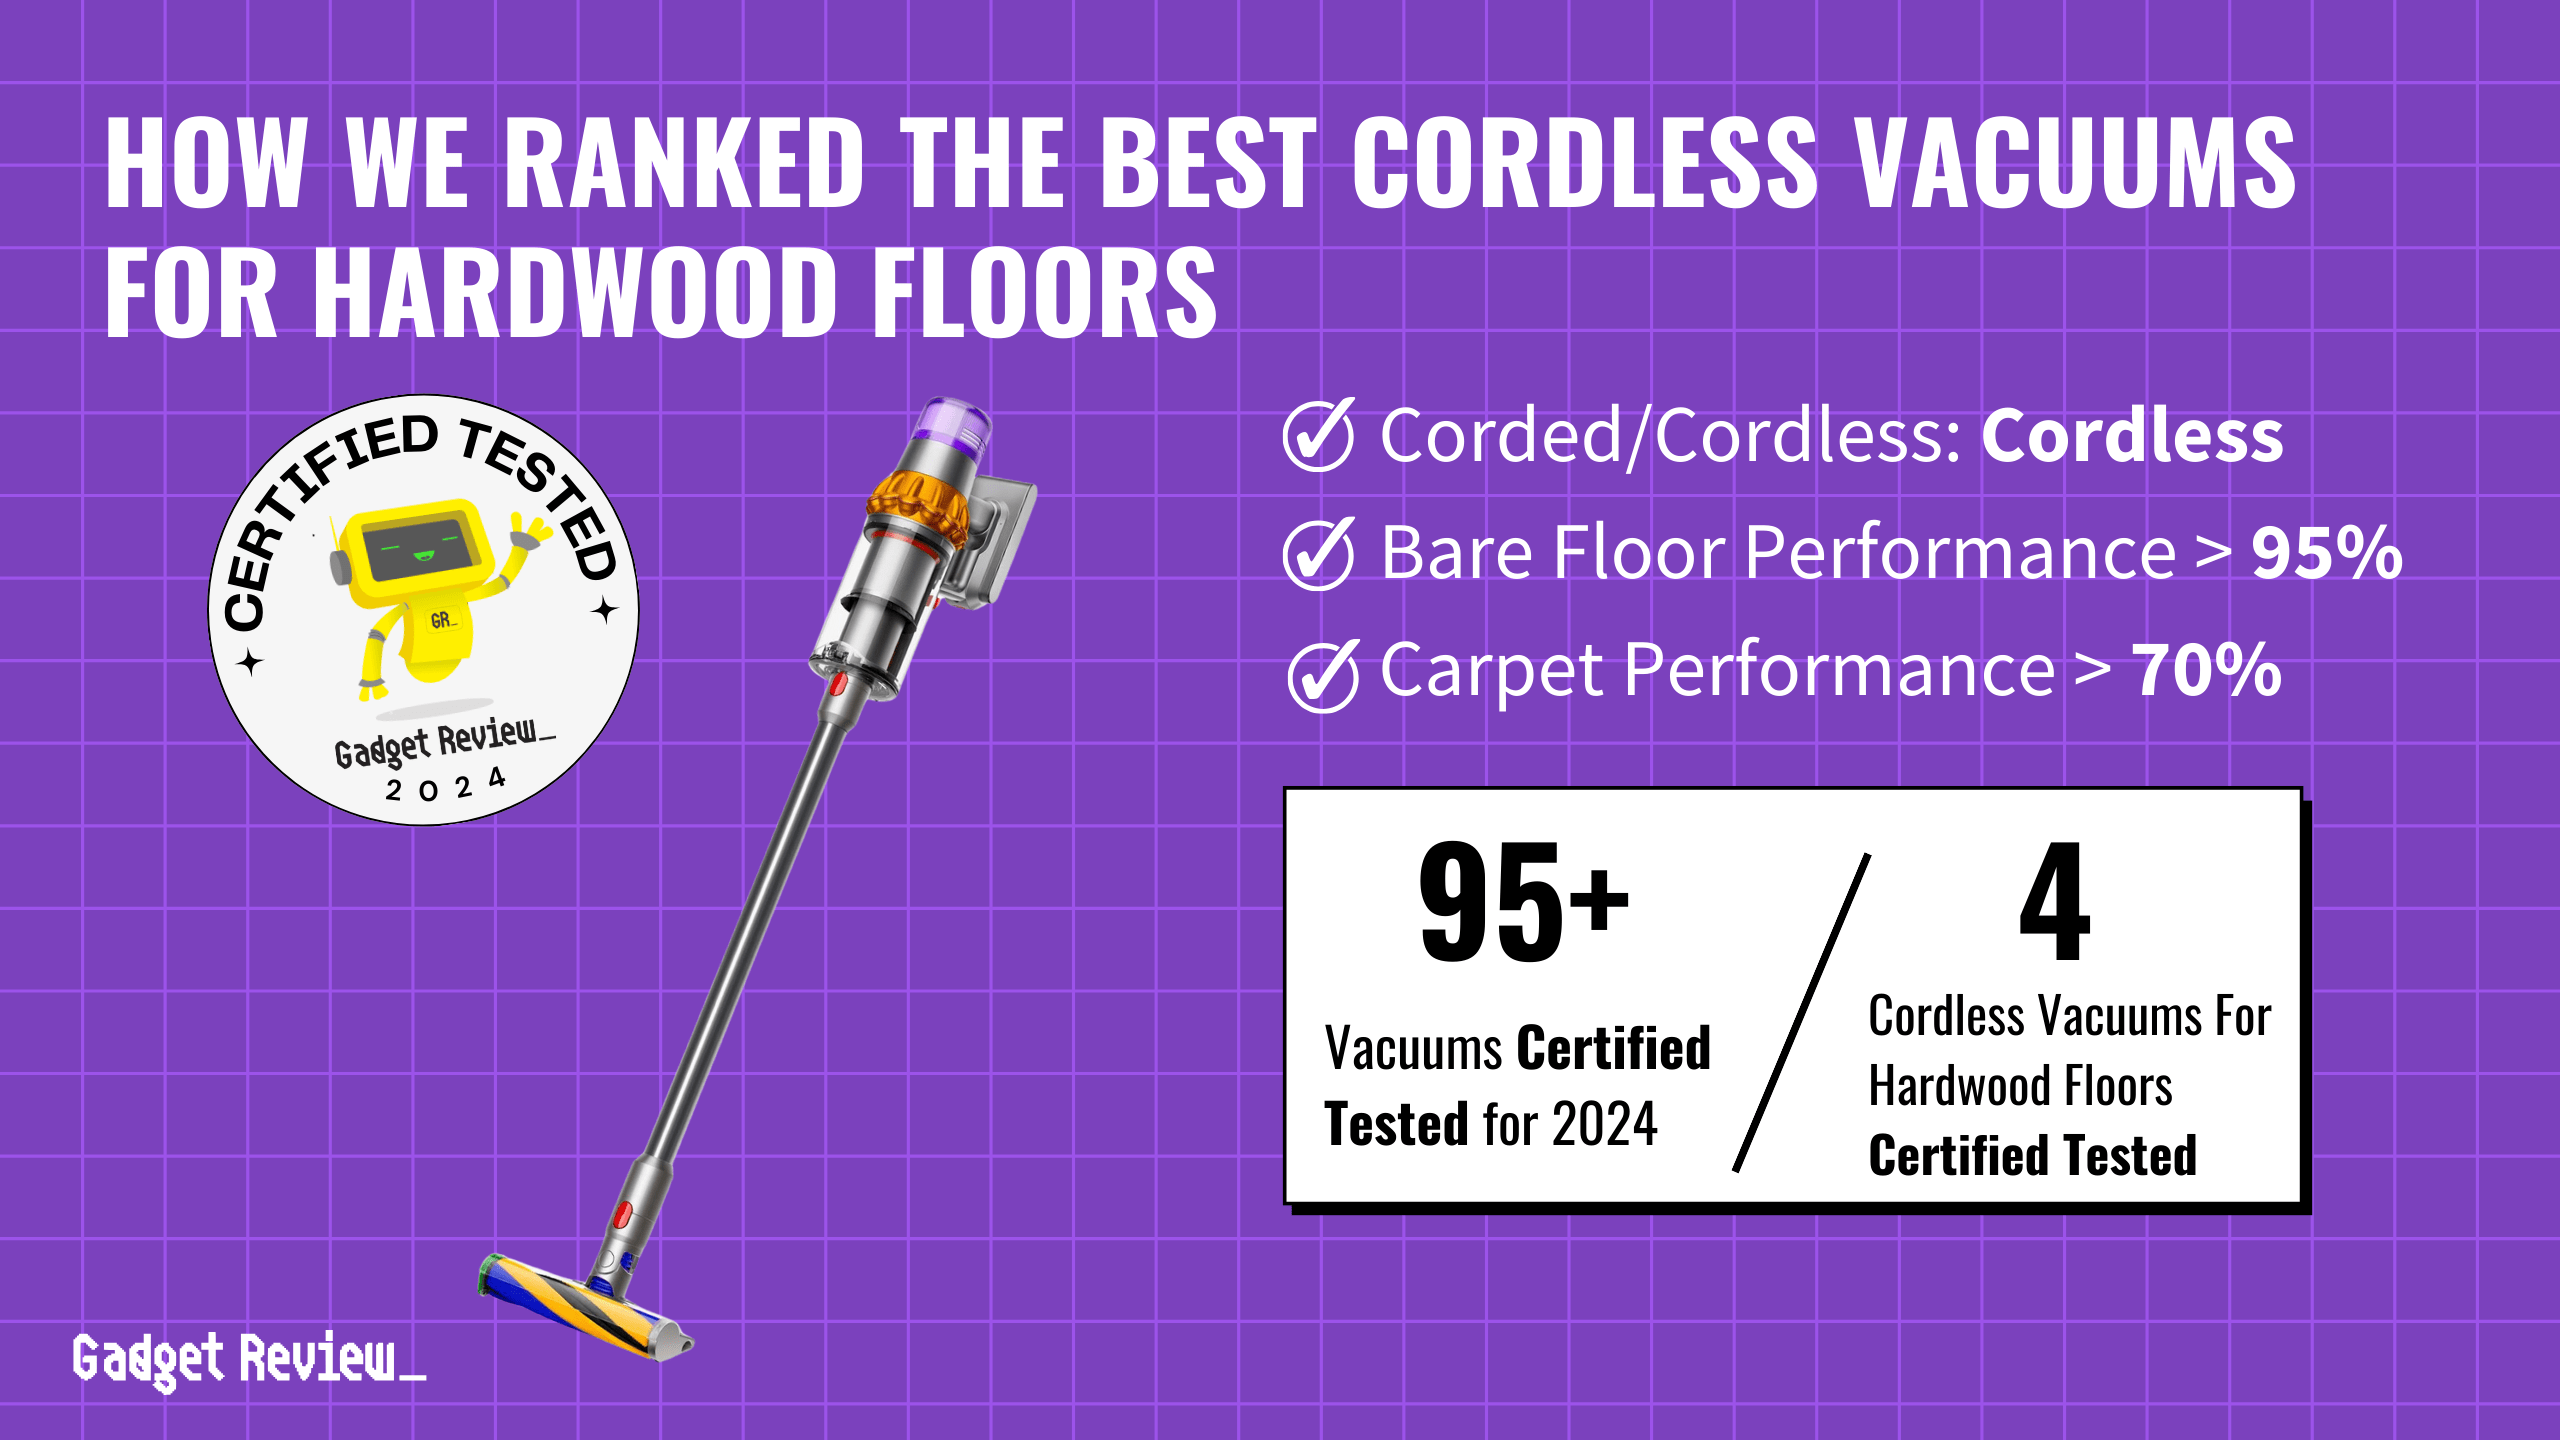 What are the Top 5 Cordless Vacuums for Hardwood Floors?